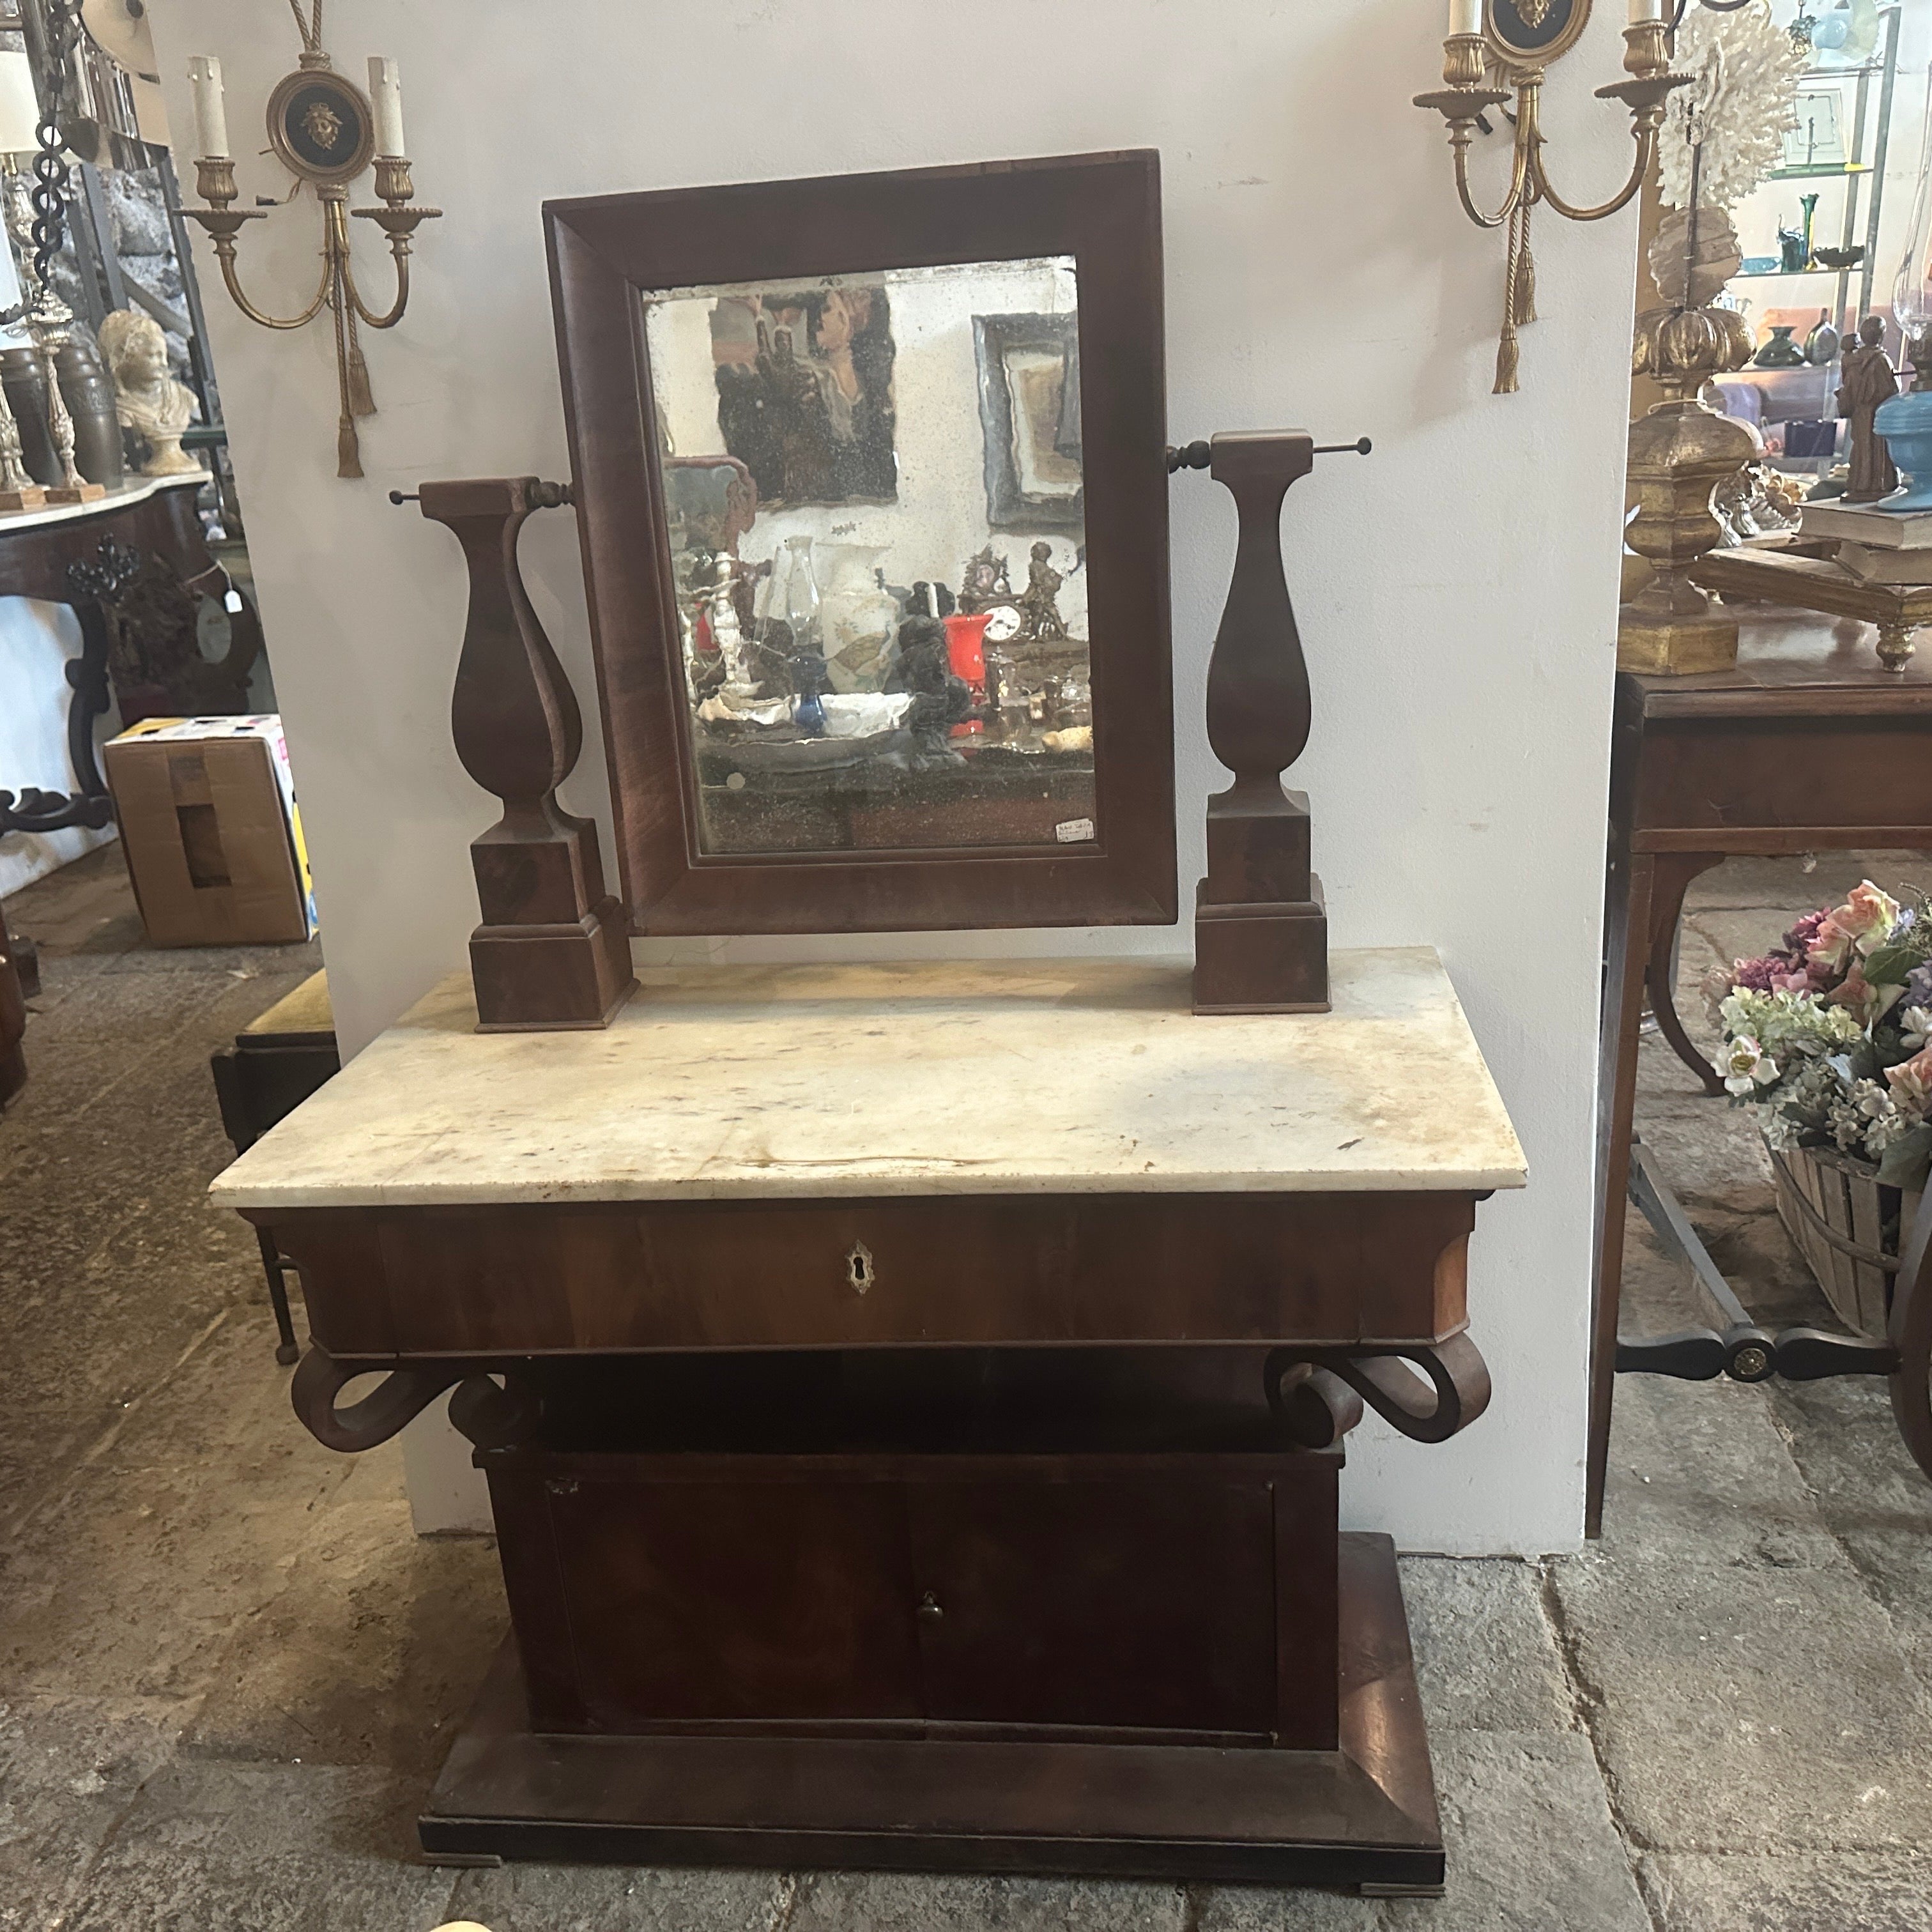 This Sicilian vanity table is an exquisite piece of furniture representative of the design trends and craftsmanship of that era. The primary structural material is fir wood, chosen for its strength and workability. The exterior is veneered in